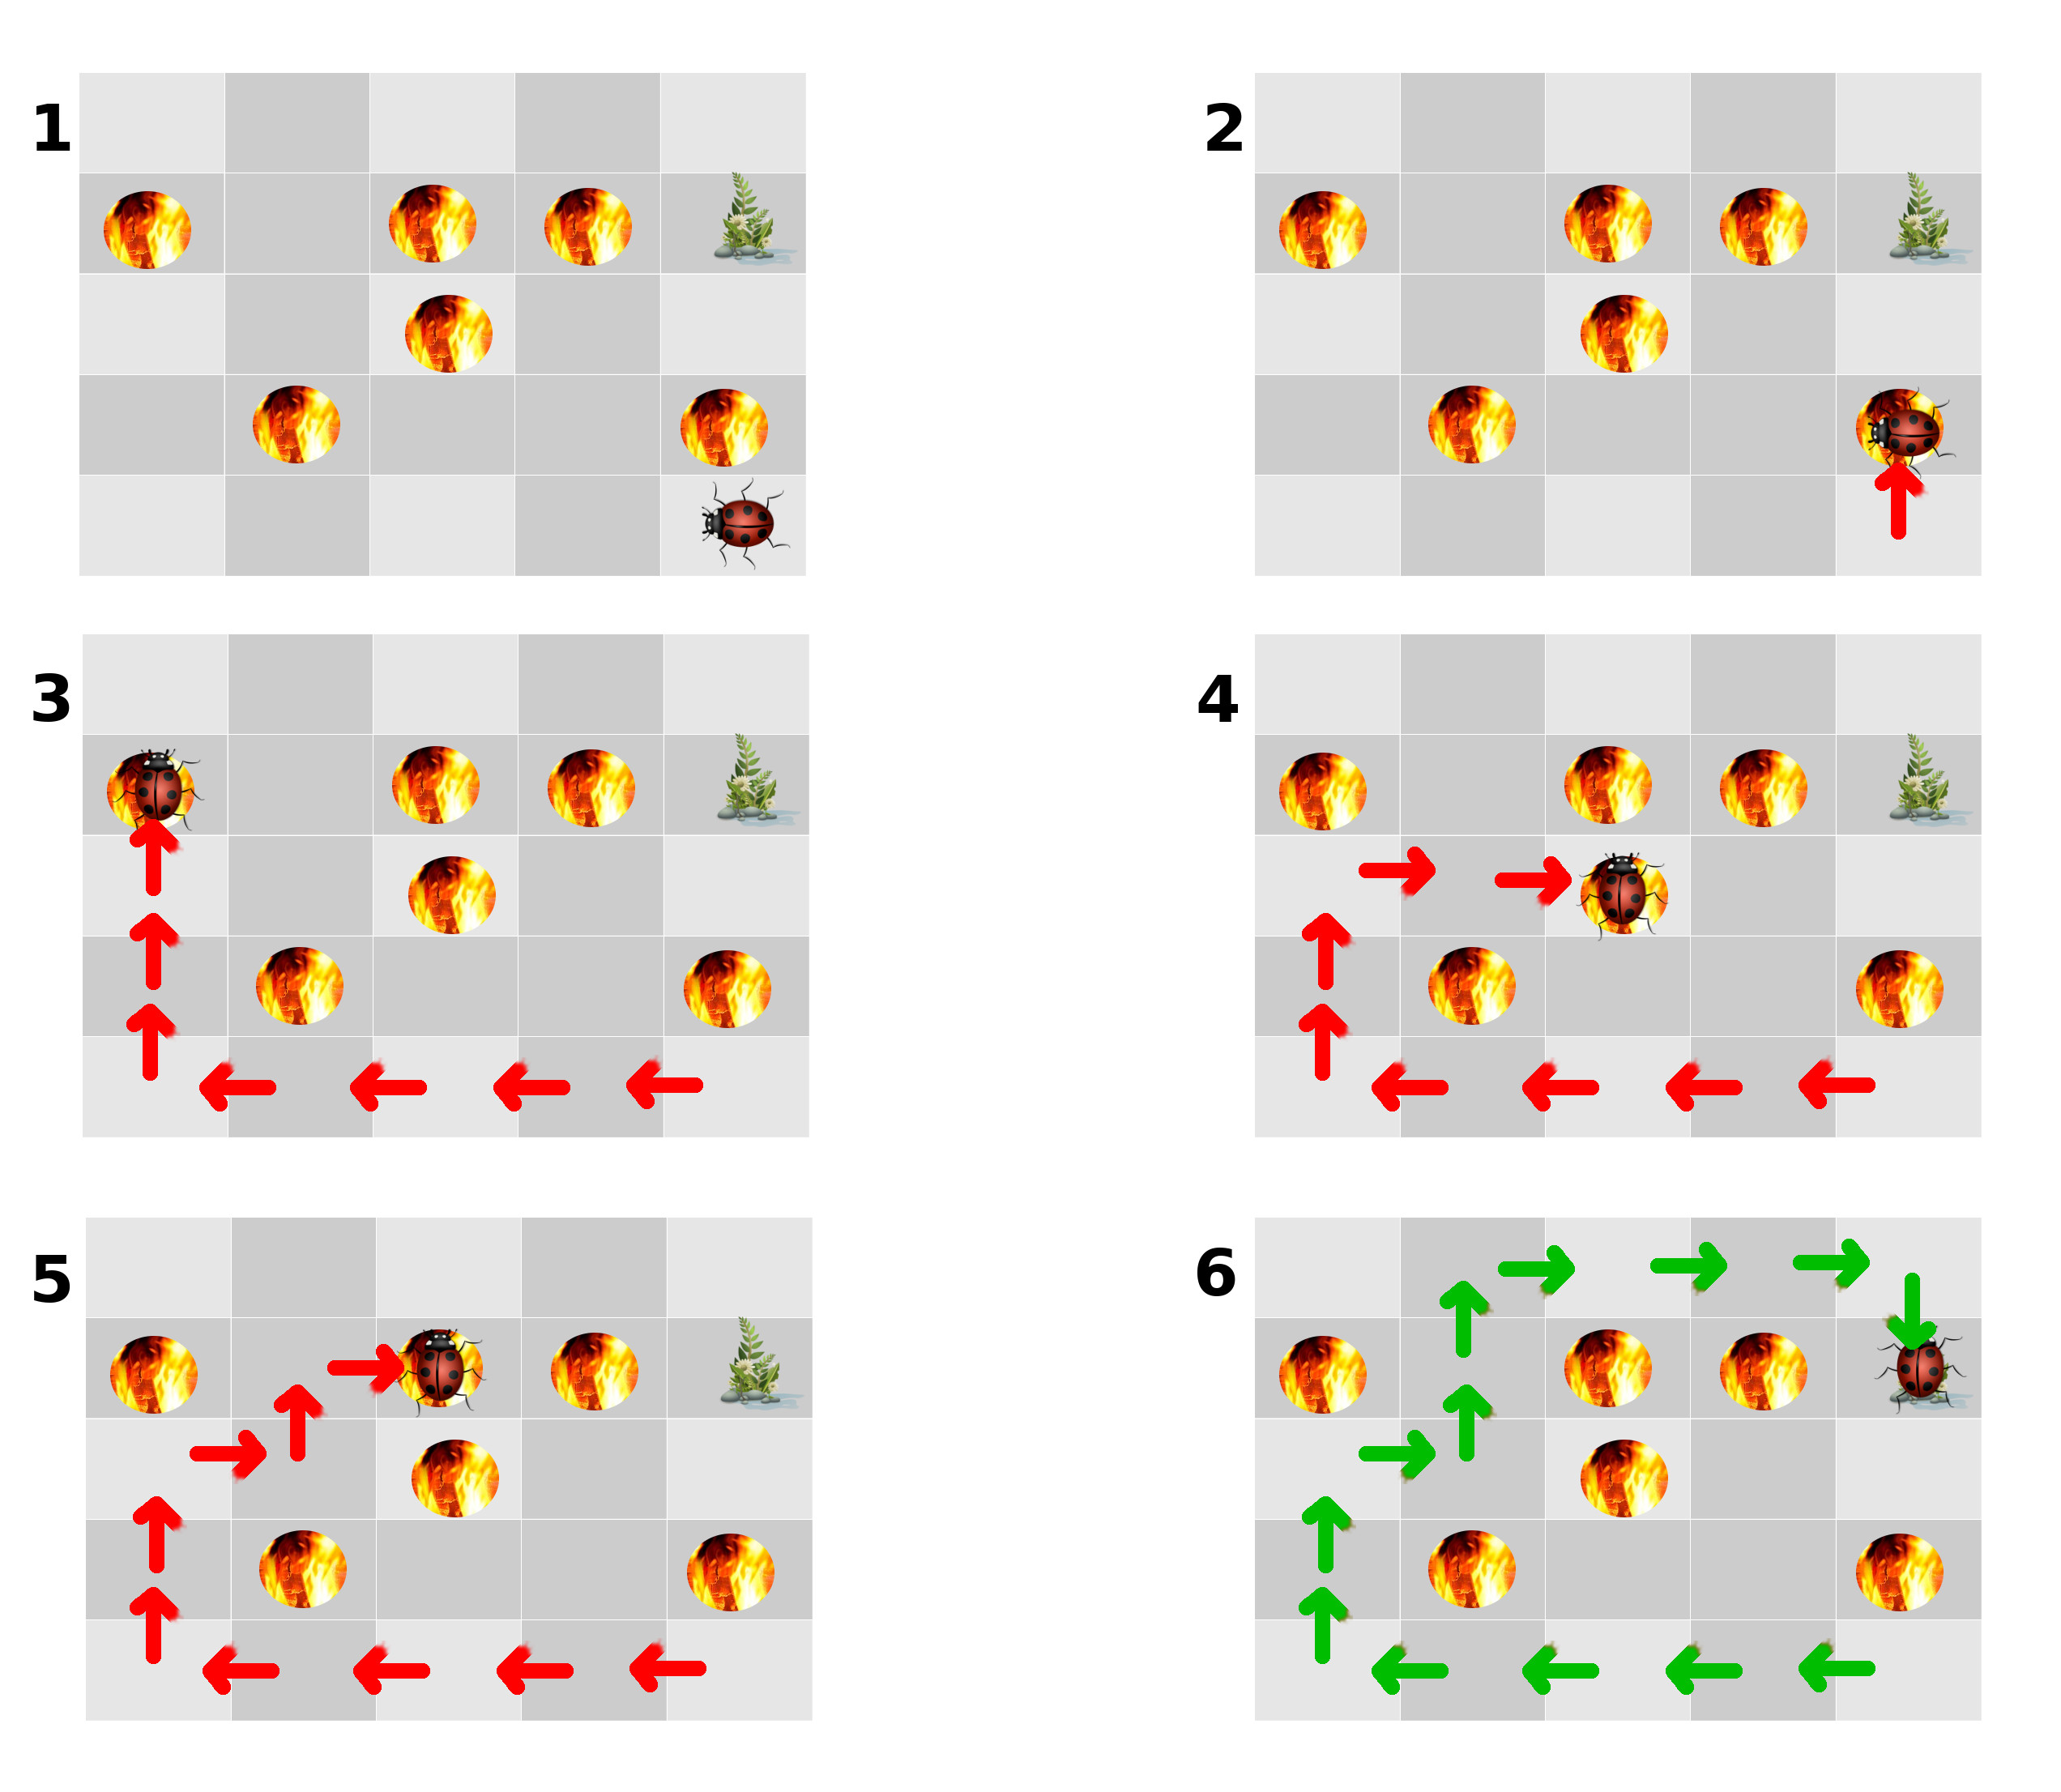 Visualization of reinforcement learning